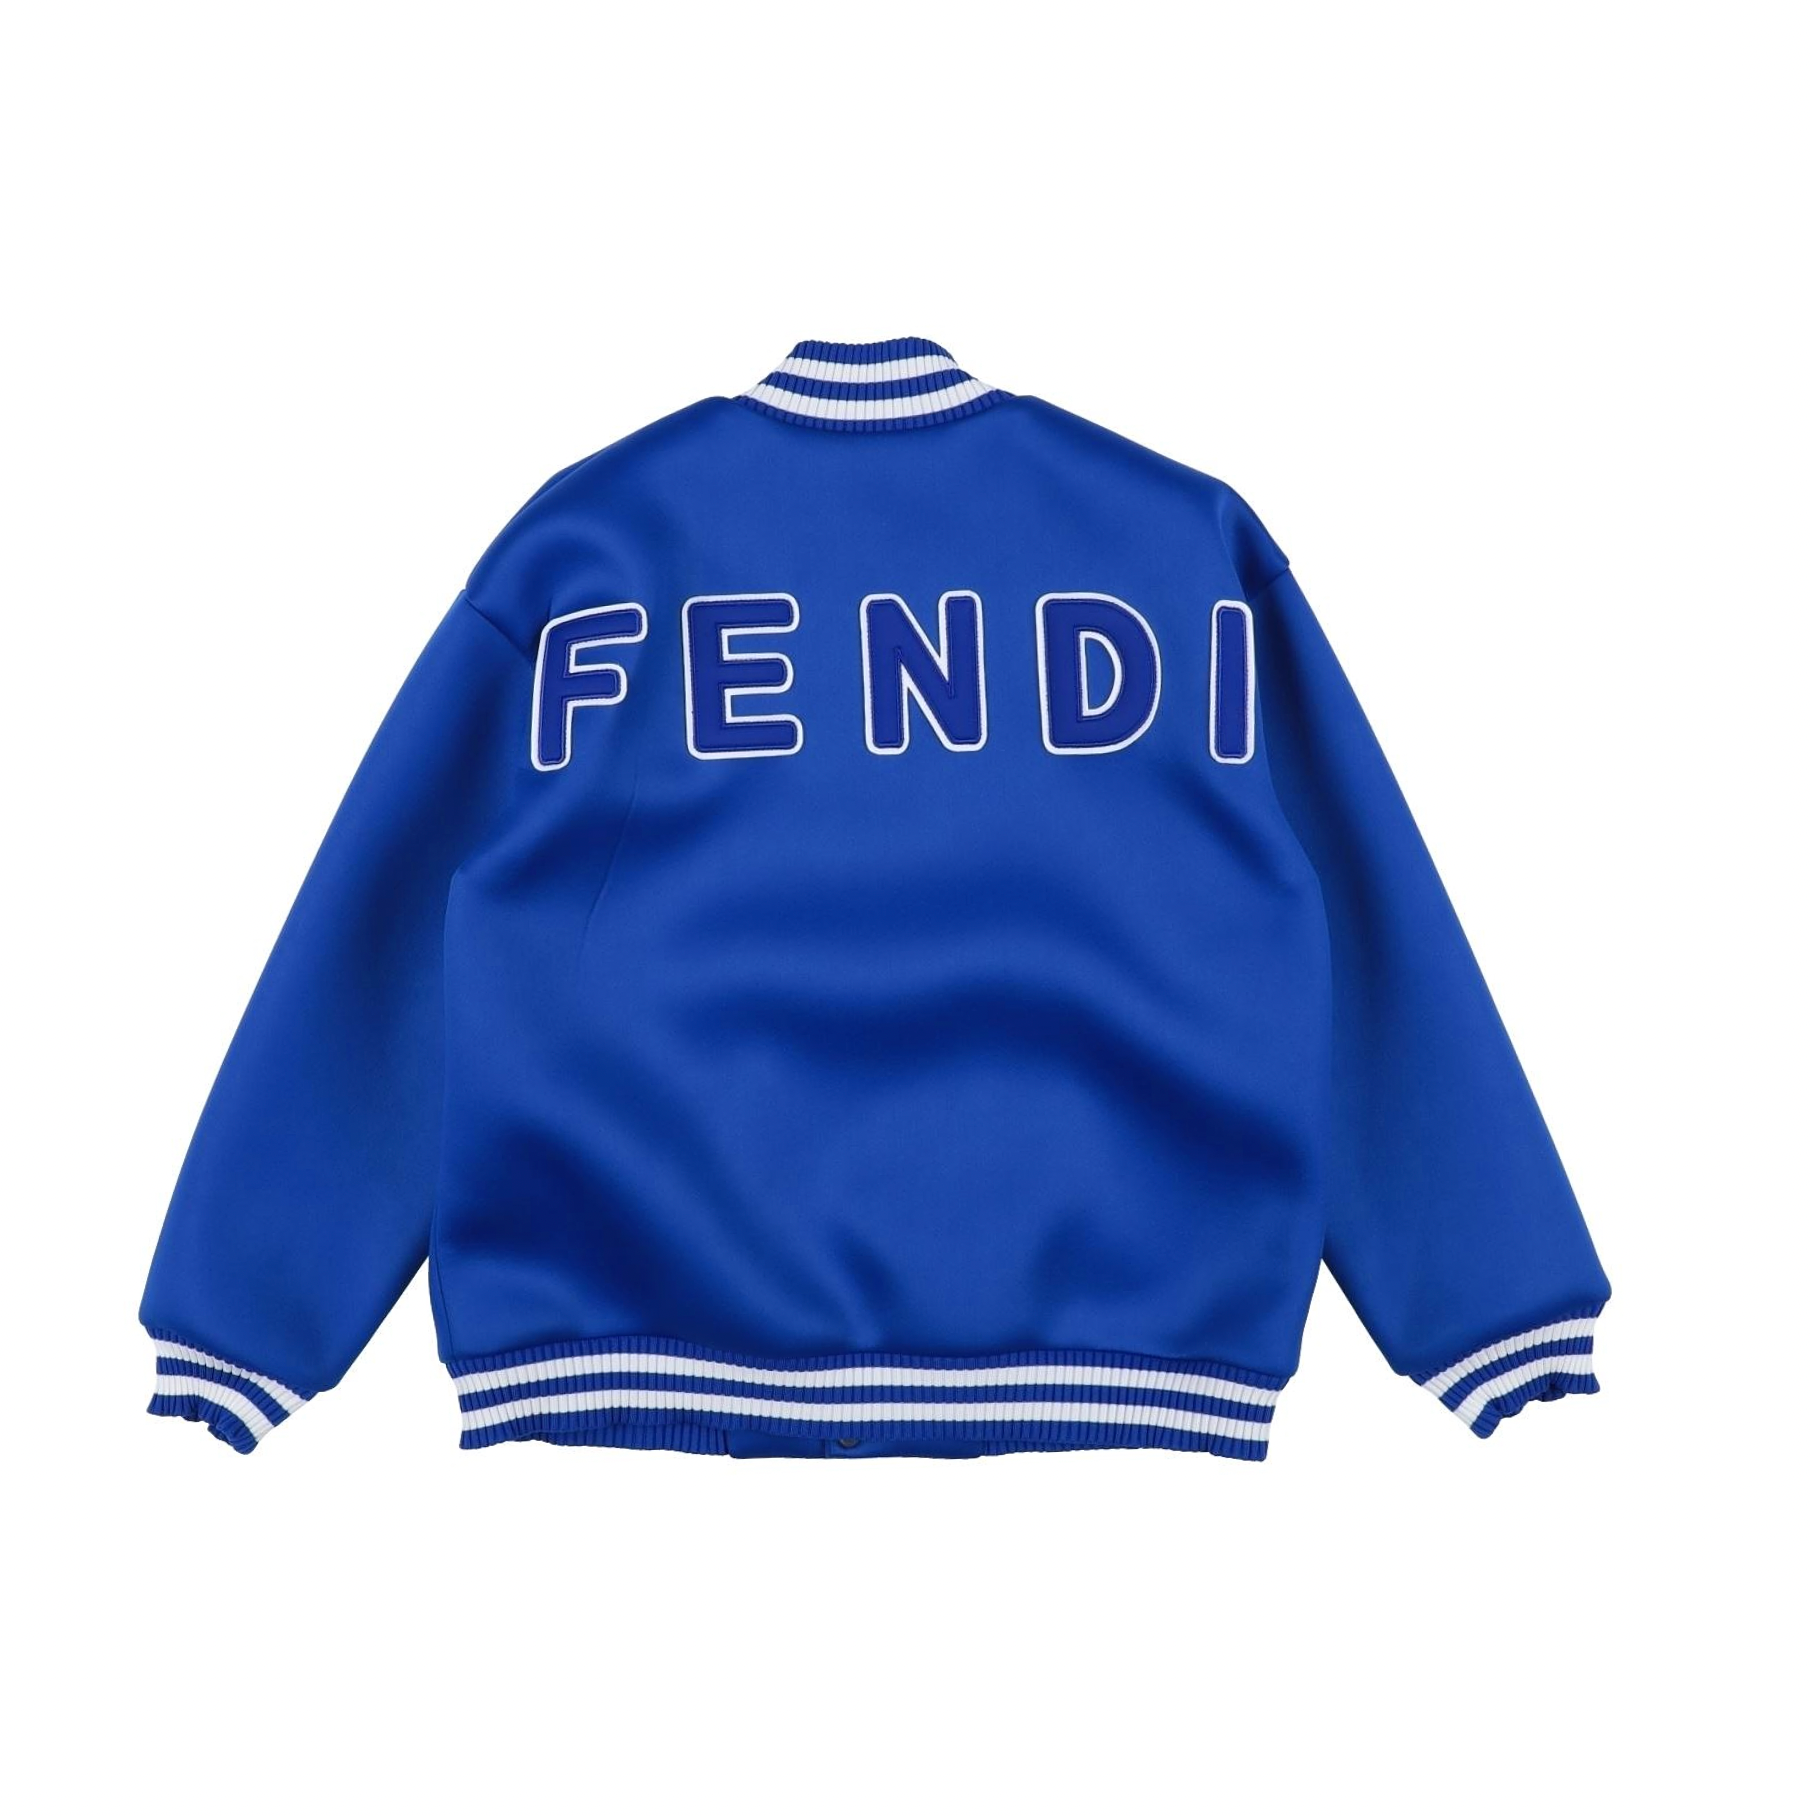 FENDI - Blue bomber jacket with white lines - 6 years old